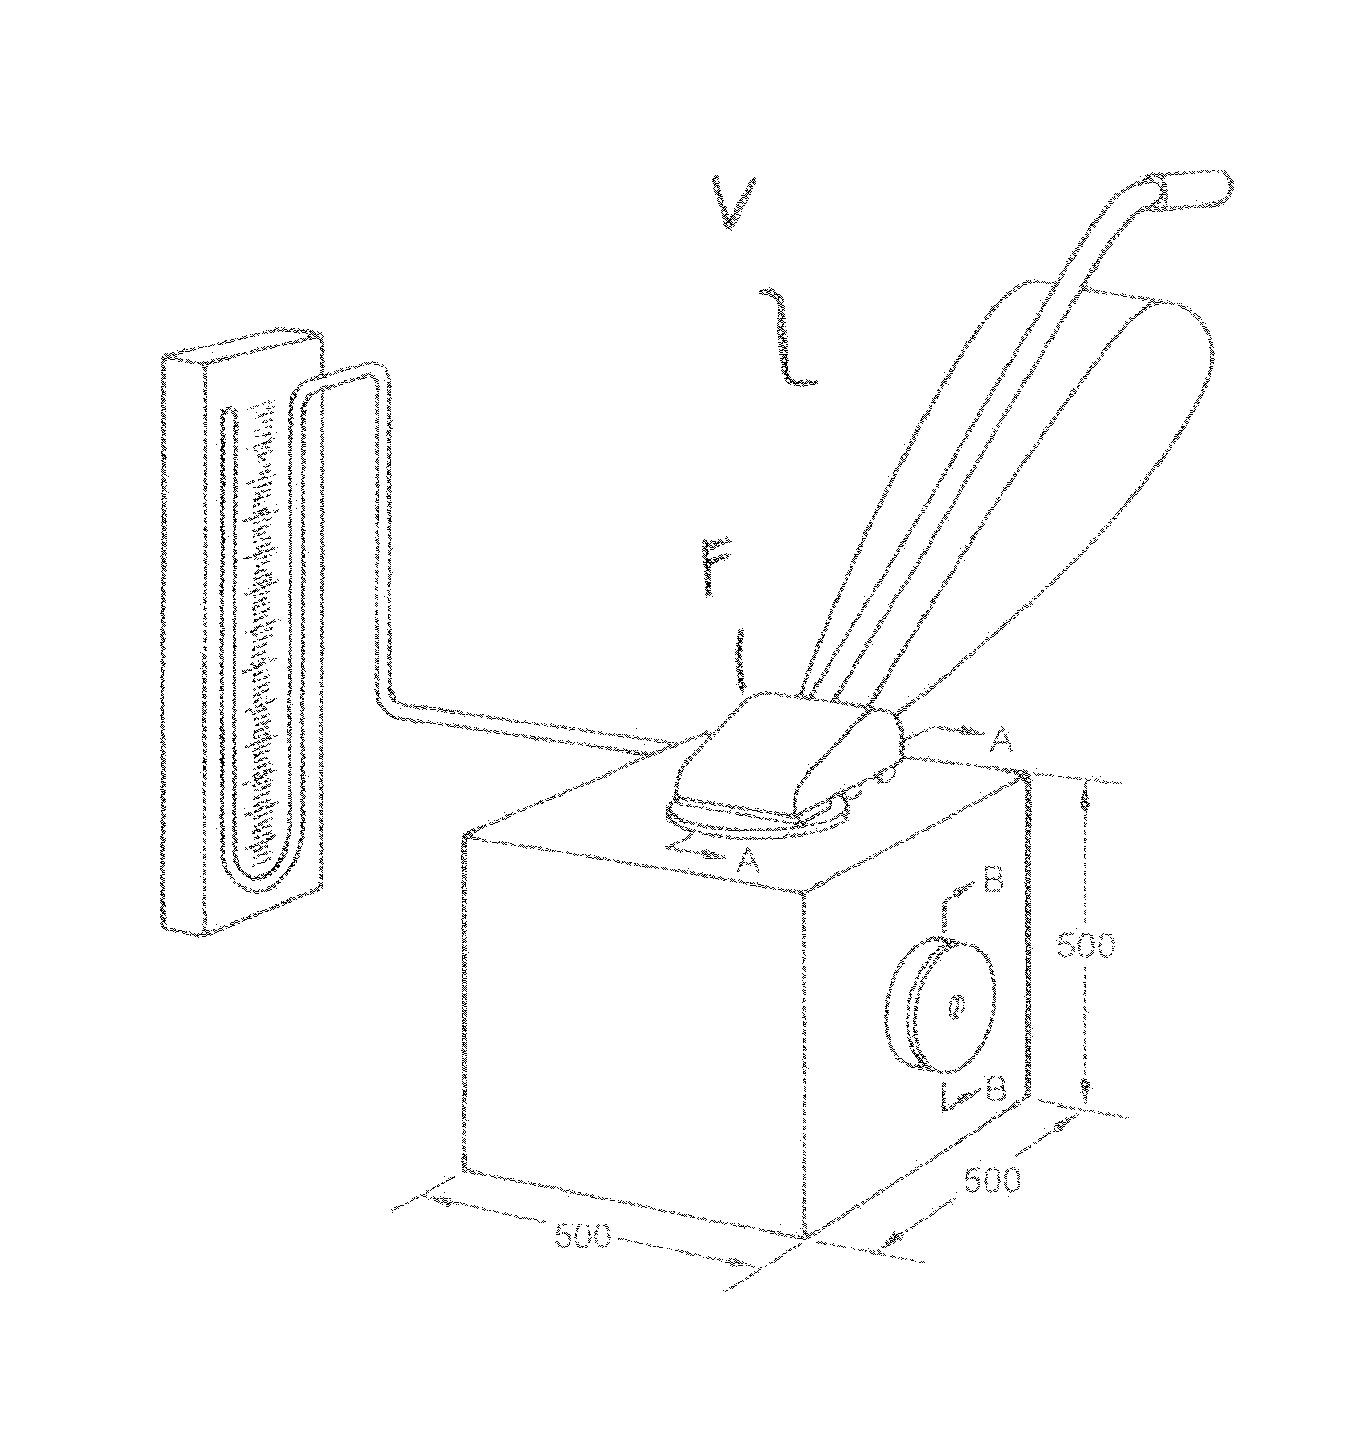 Vacuum cleaning apparatus having a vacuum cleaning unit and a filter bag